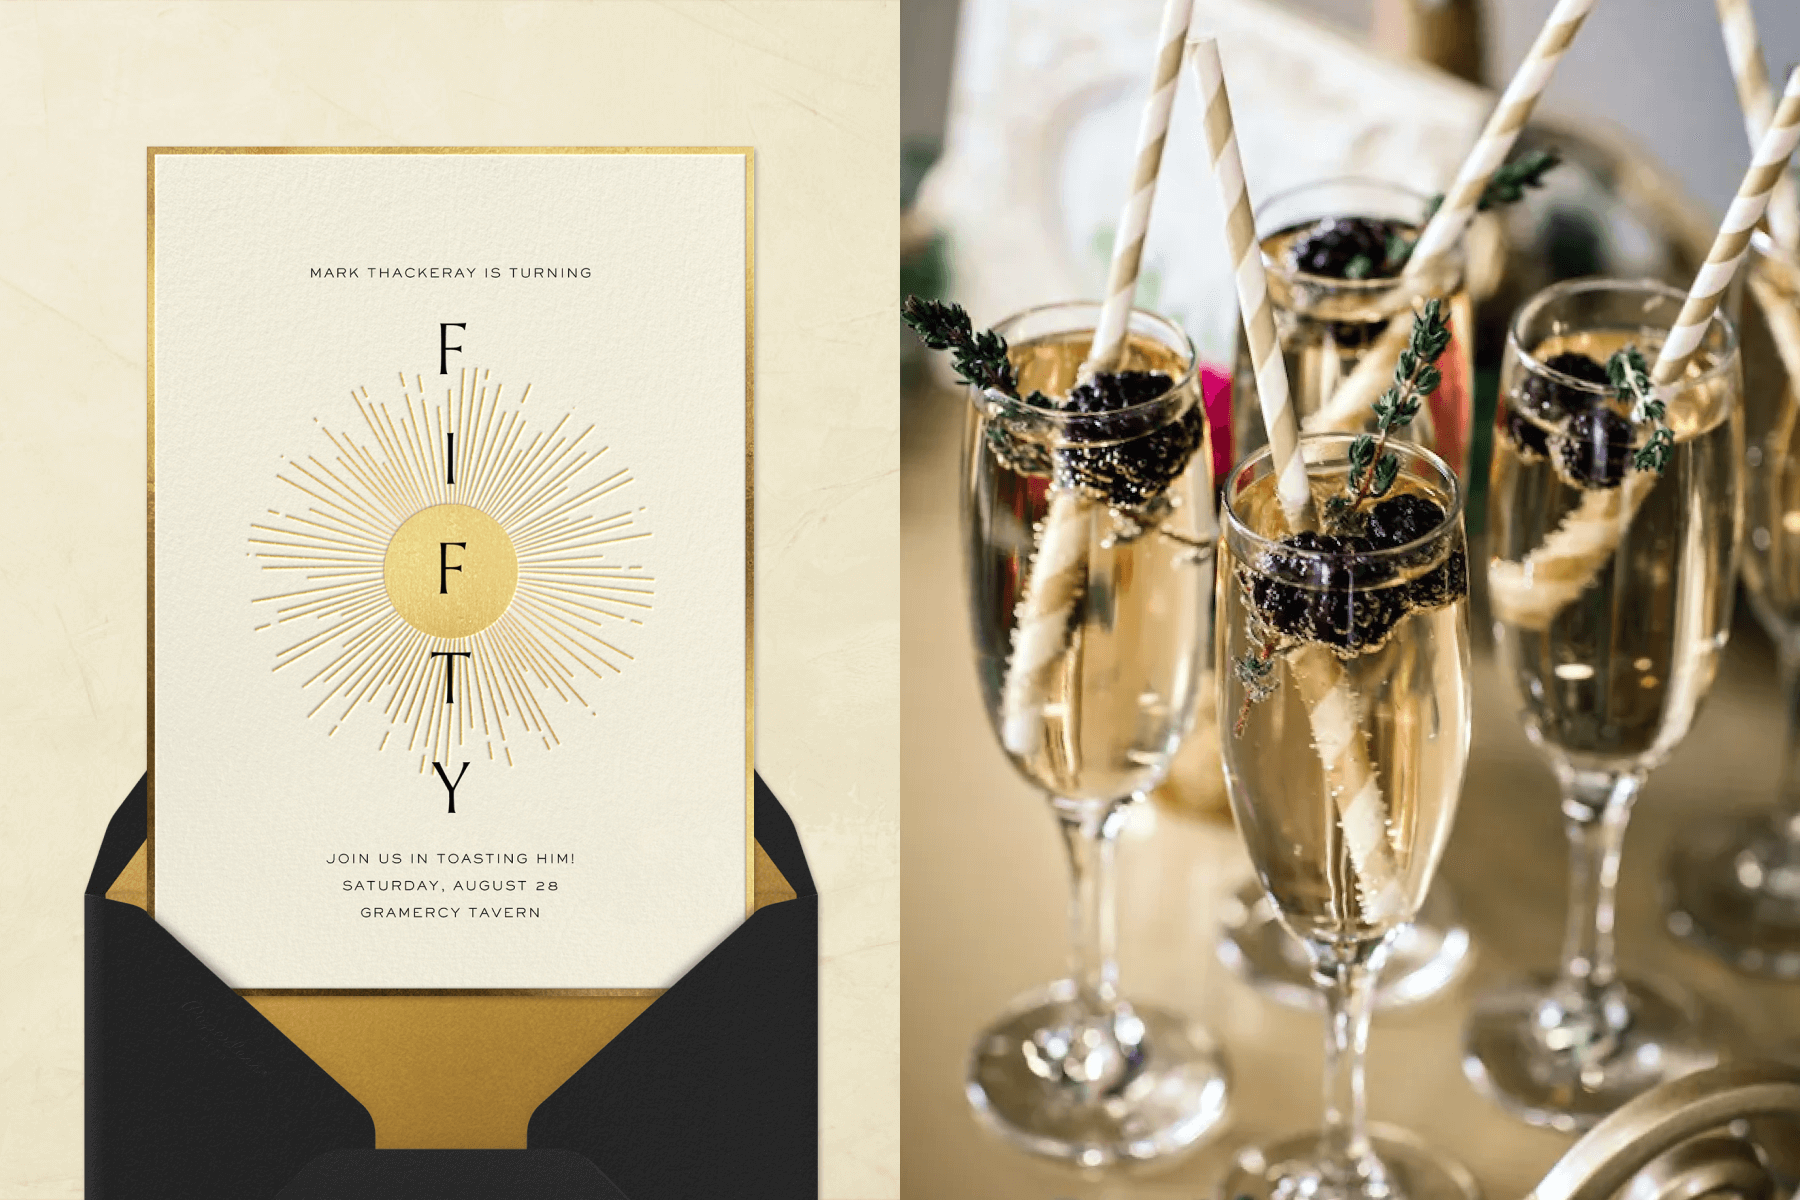 Left: A cream 50th birthday invitation with a gold sunburst in the center and gold border, and the word “FIFTY” written vertically. Right: Four Champagne flutes with blackberry garnishes and striped straws.